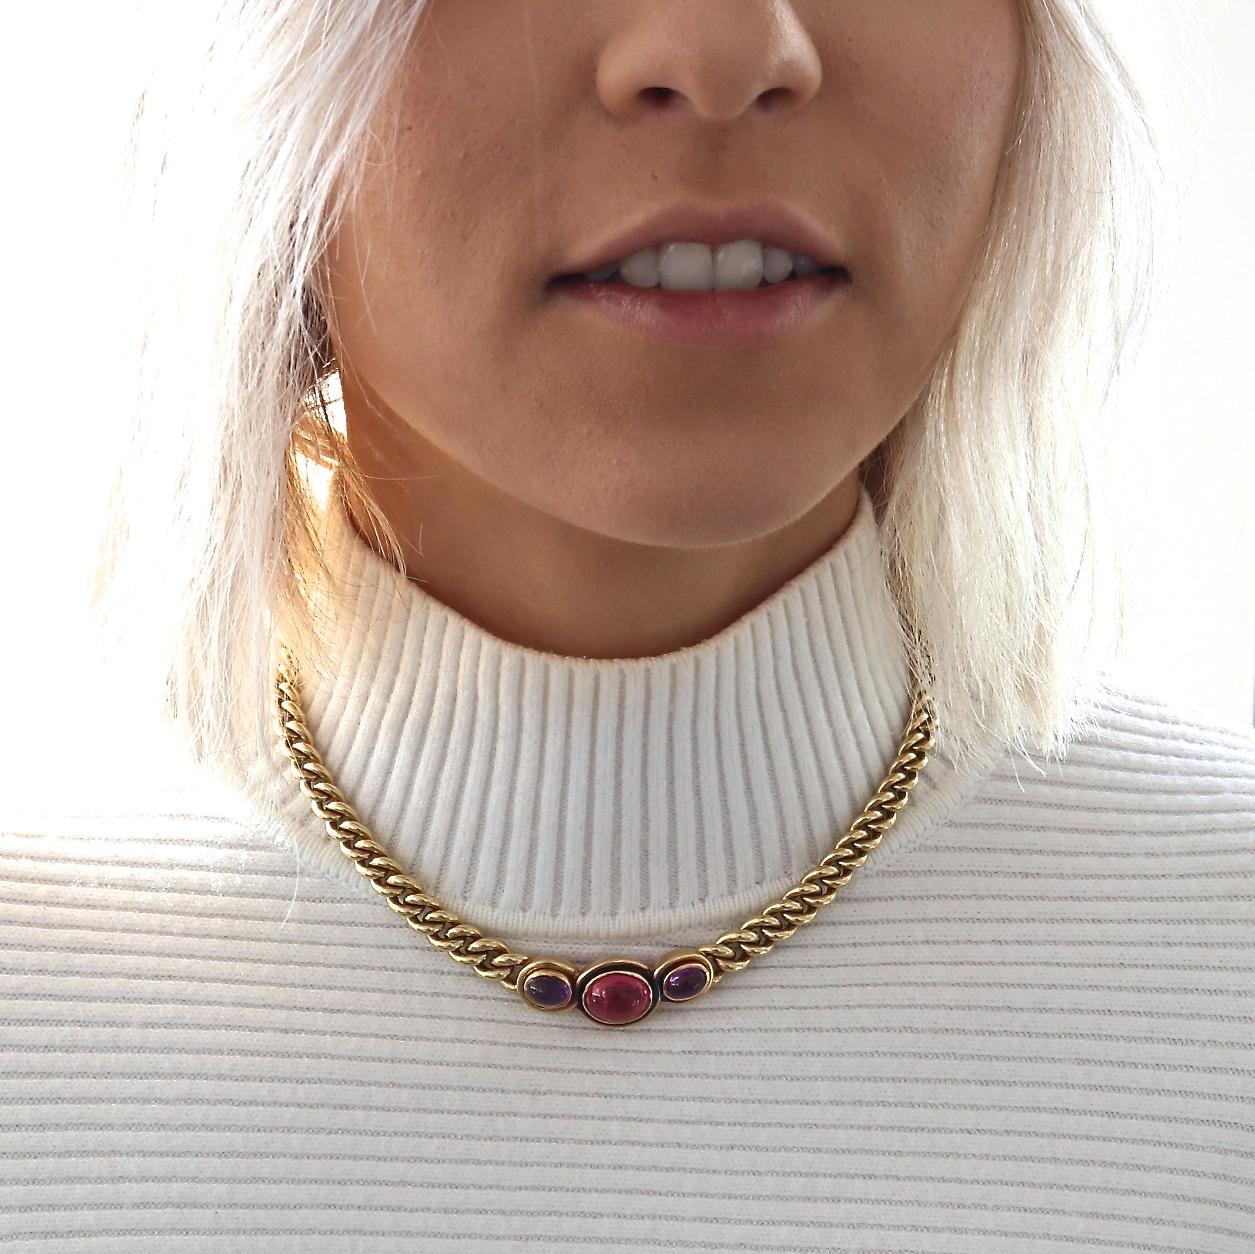 Heavy 18k gold link chain highlighted with perfect pink tourmaline and amethyst cabochons, in classic Bulgari style. Featuring two cabochon cut amethysts weighing approximately 1.32 carats each and one cabochon pink tourmaline approximately 5.06